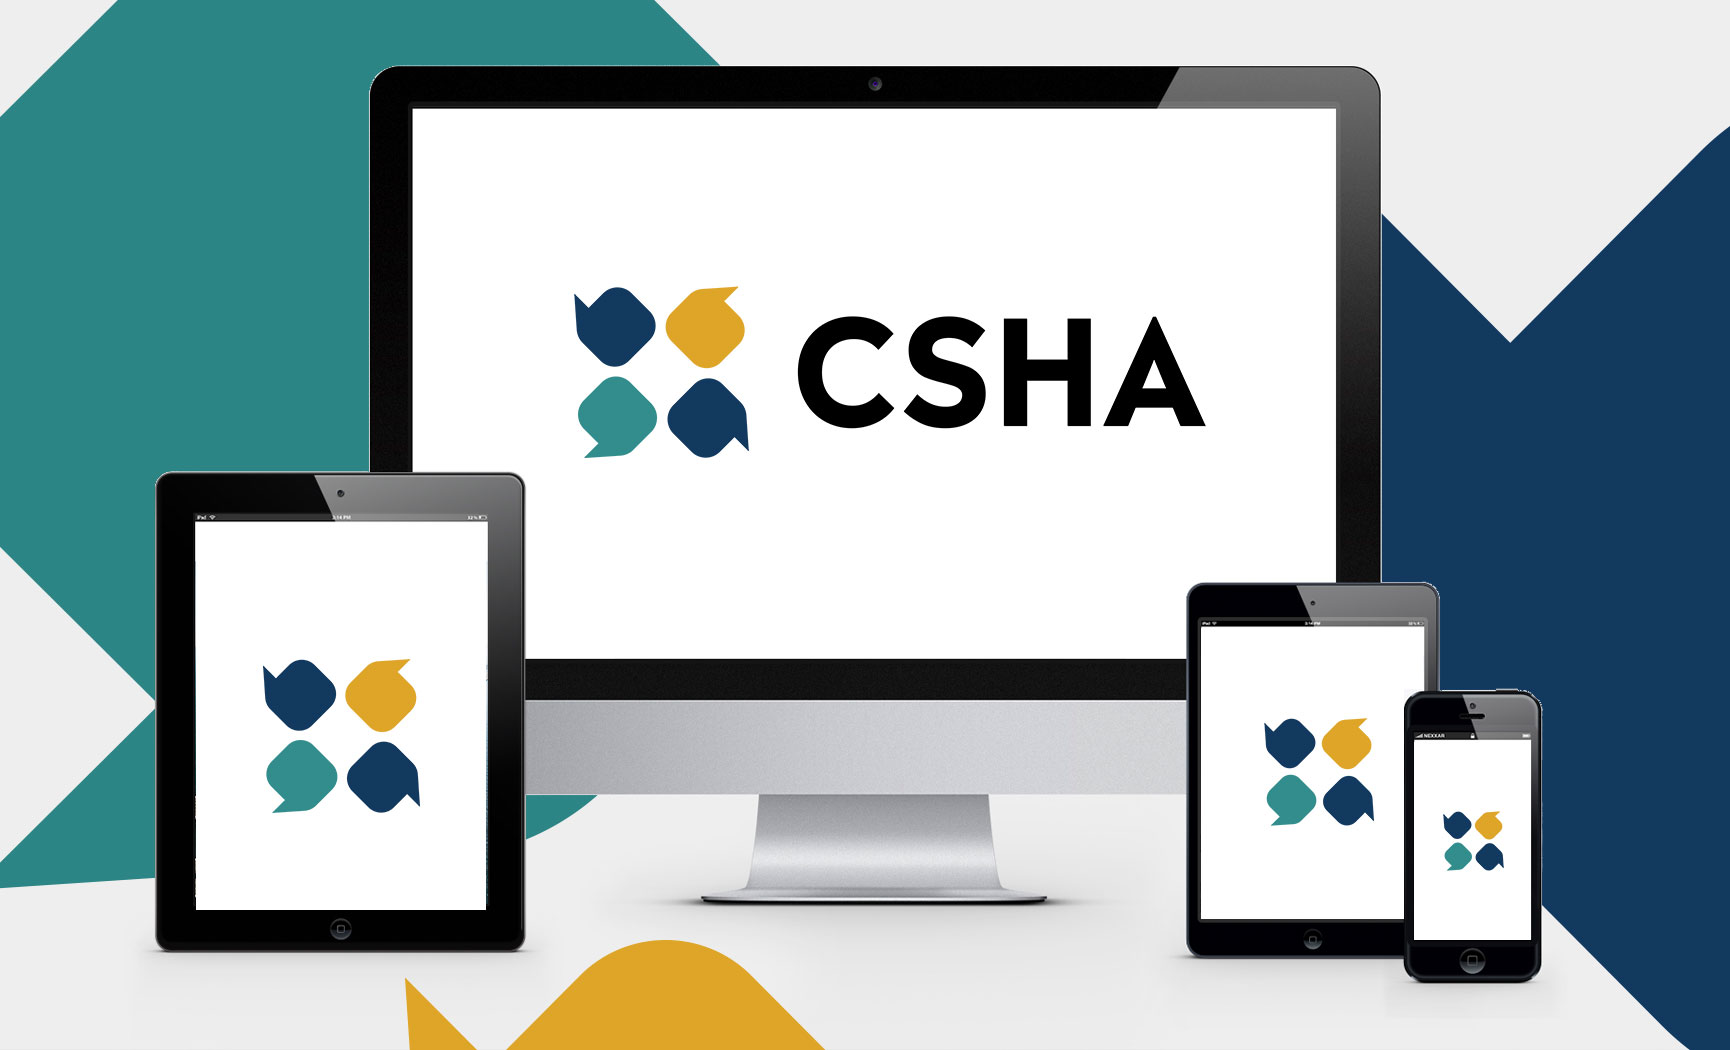 NEWS RELEASE: CSHA rolls out new brand strategy, website to tell the story of its life-changing members